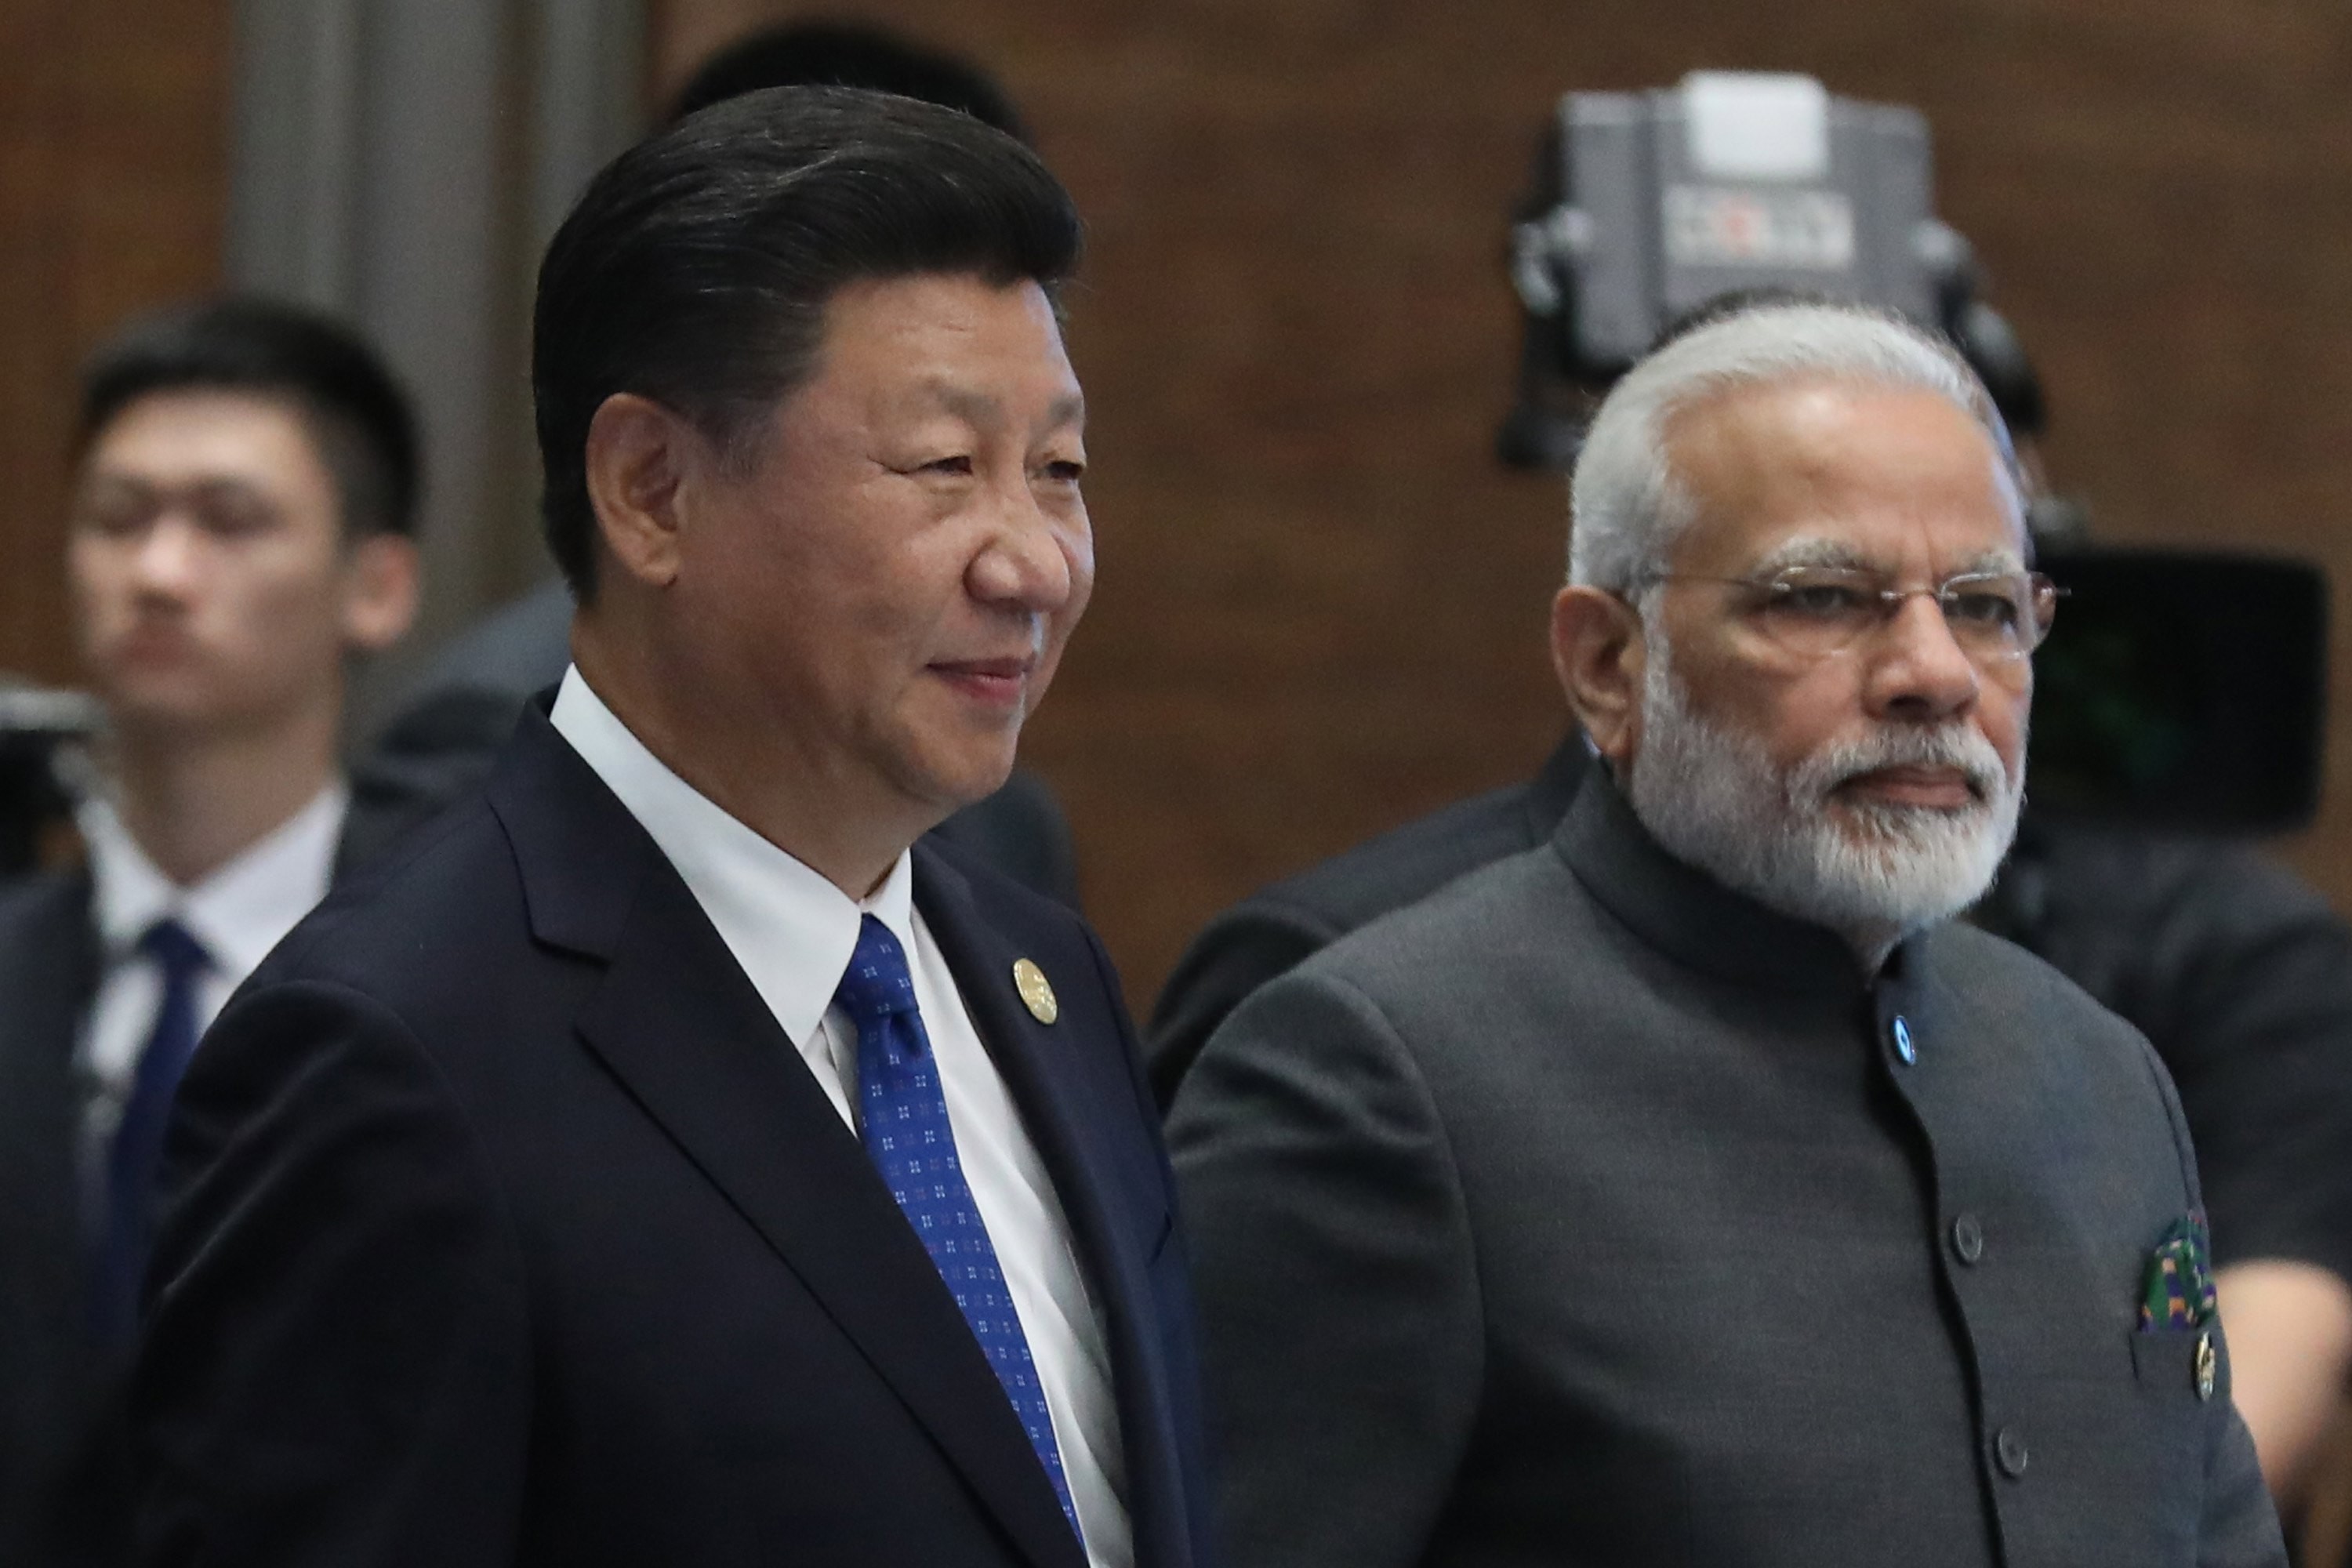 China, led by President Xi Jinping, continues to block India, led by Prime Minister Narendra Modi, in its efforts to join the Nuclear Suppliers Group, stating that Delhi must first sign the nuclear Non-Proliferation Treaty. Photo: EPA-EFE